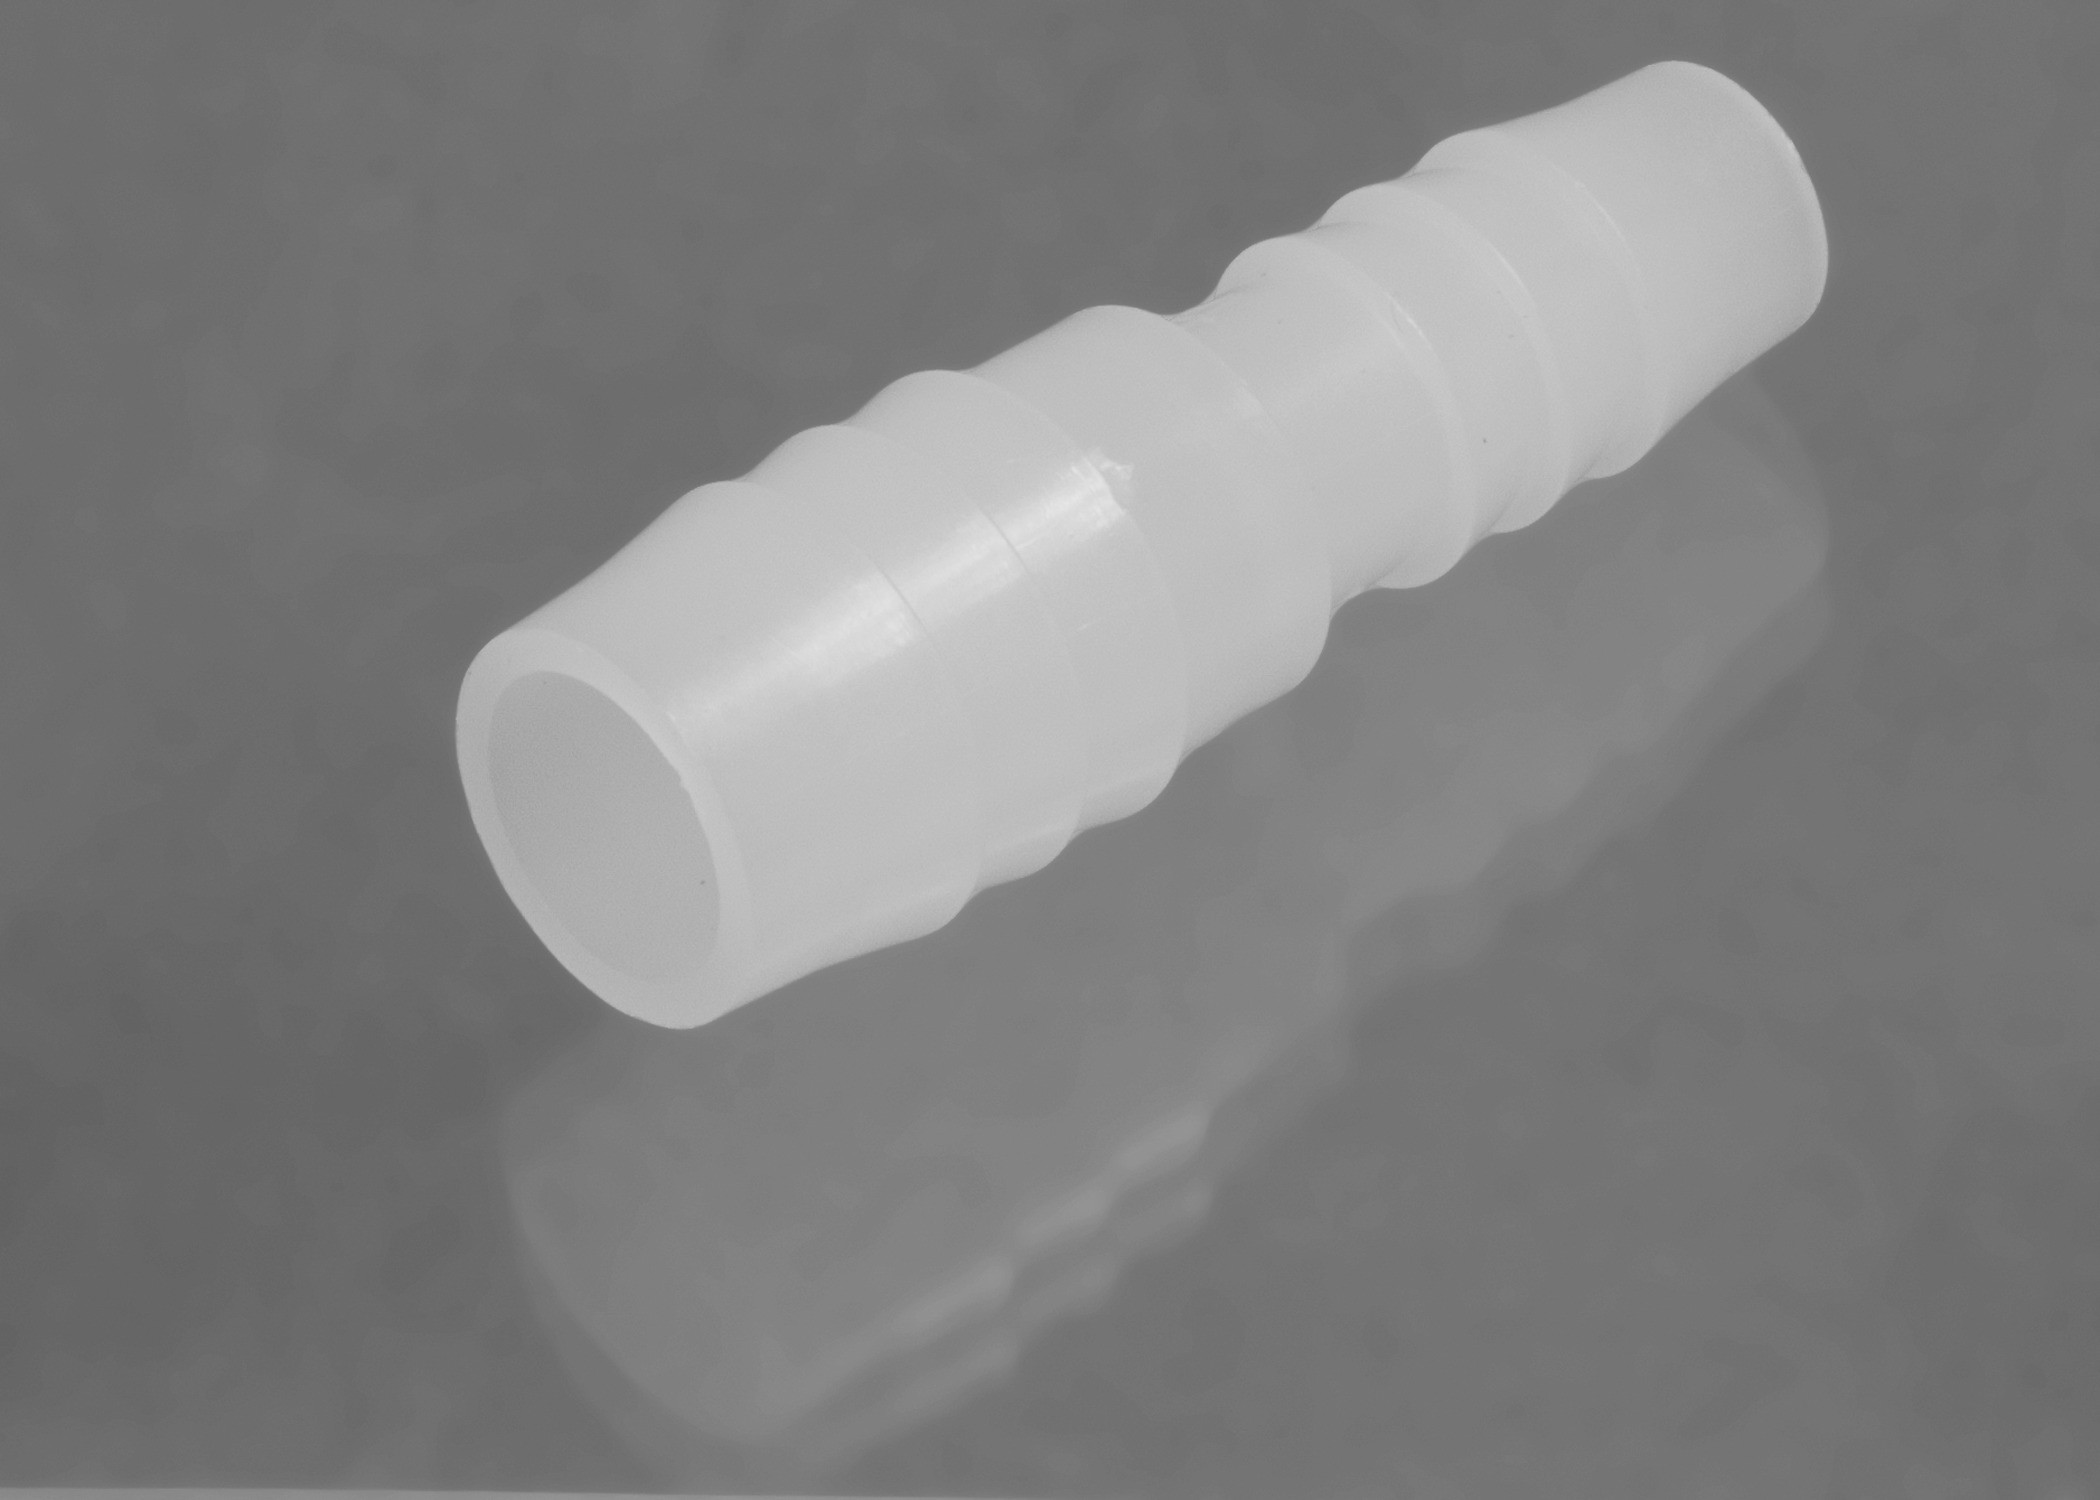 SP Bel-Art Stepped Tubing Connectors for ⅜ in. to ½ in. Tubing; Polypropylene (Pack of 12)